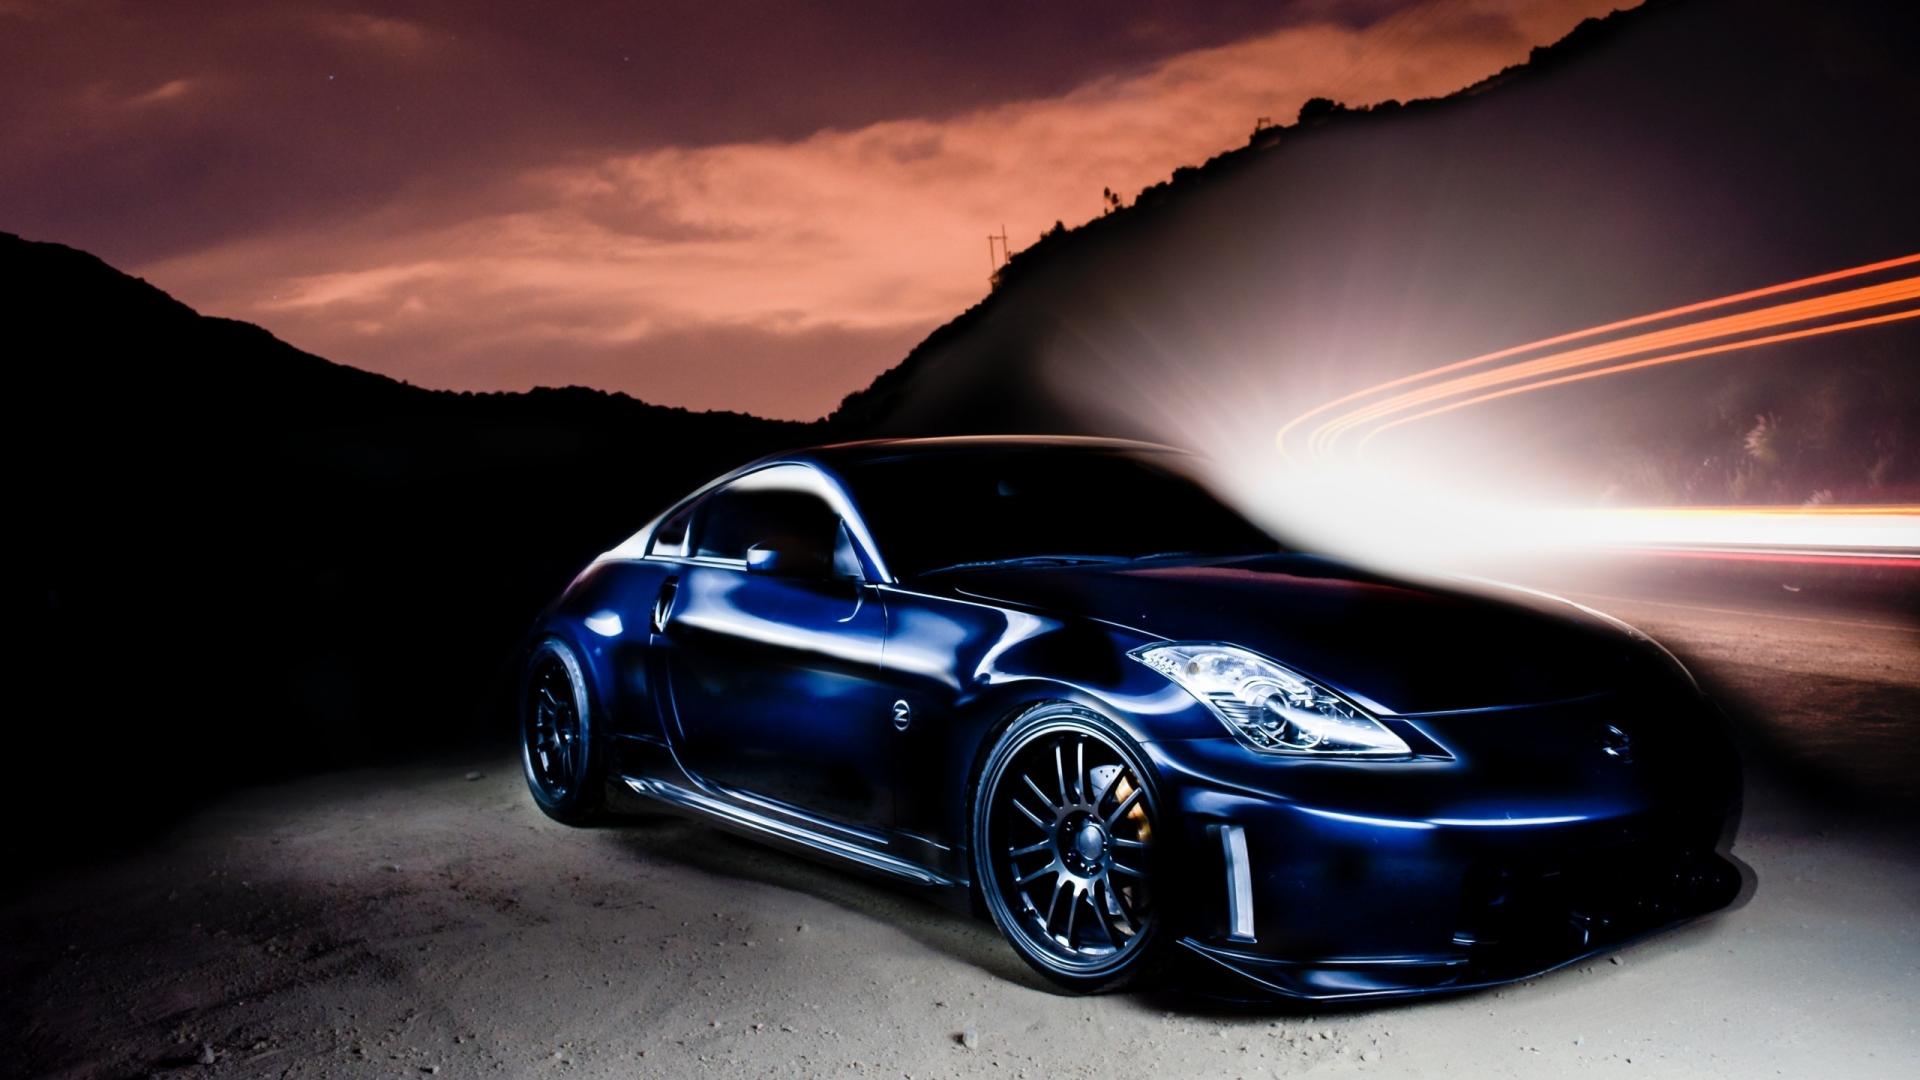 Nissan 350 Z Tuning for 1920 x 1080 HDTV 1080p resolution